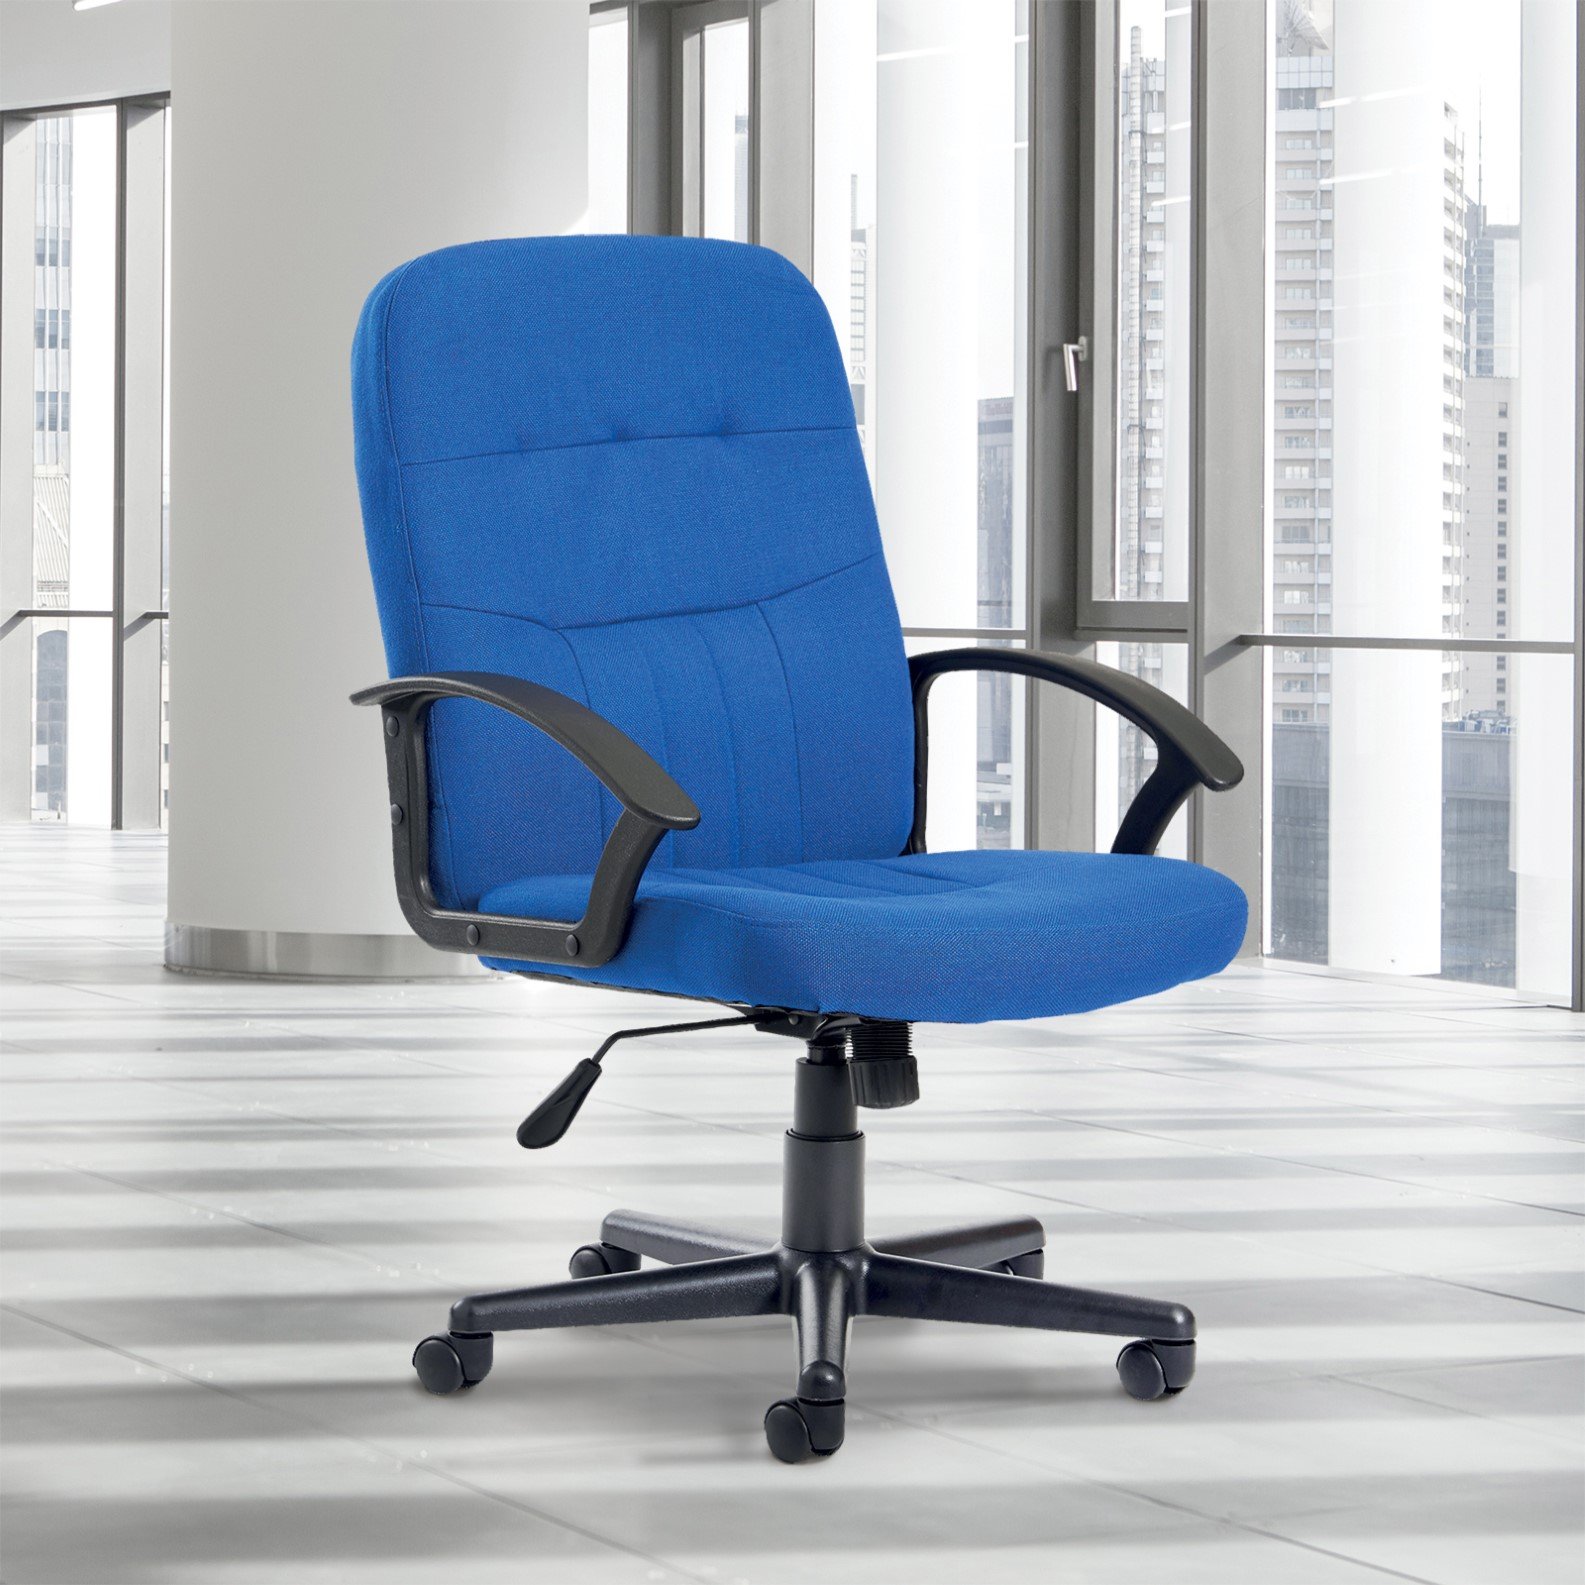 Fabric Office Chairs | Fabric Desk Chairs | Fabrics Posture Chairs